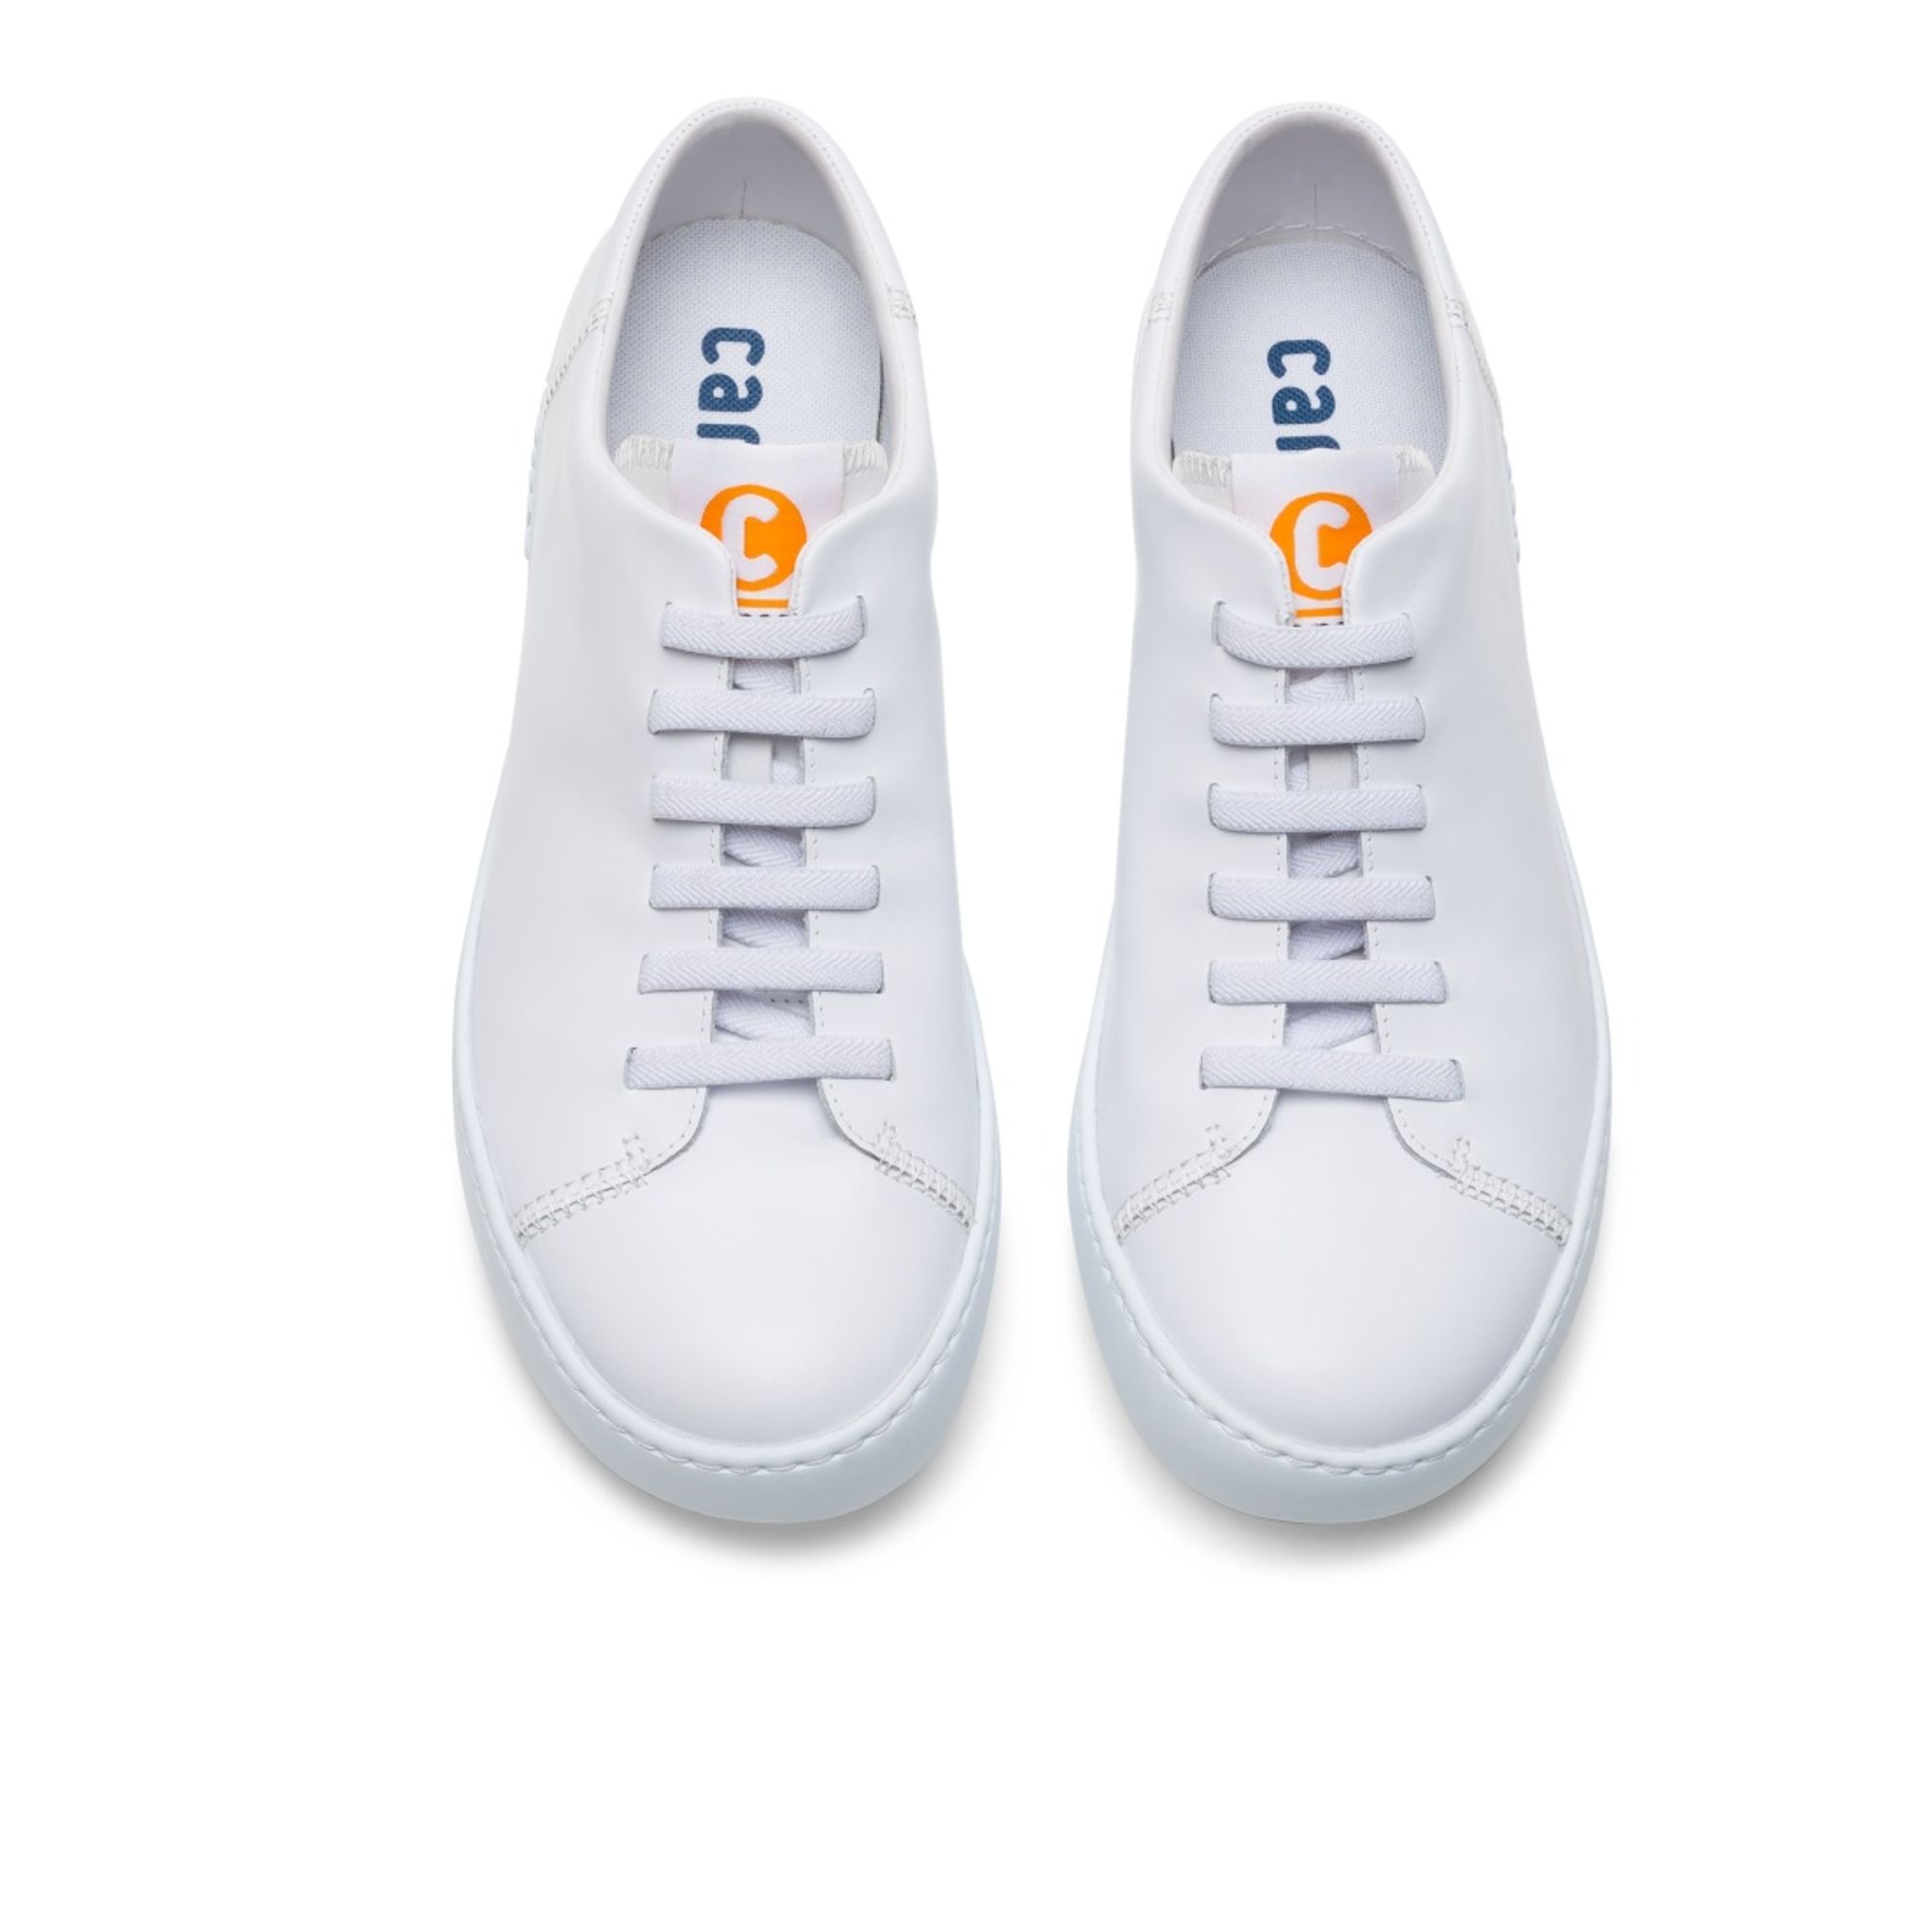 White low-top leather and textile men's sneakers.

Peu Touring is a sportier and more contemporary version of our iconic Peu, enhanced with technical upgrades and a recognizable curve on the outsole.